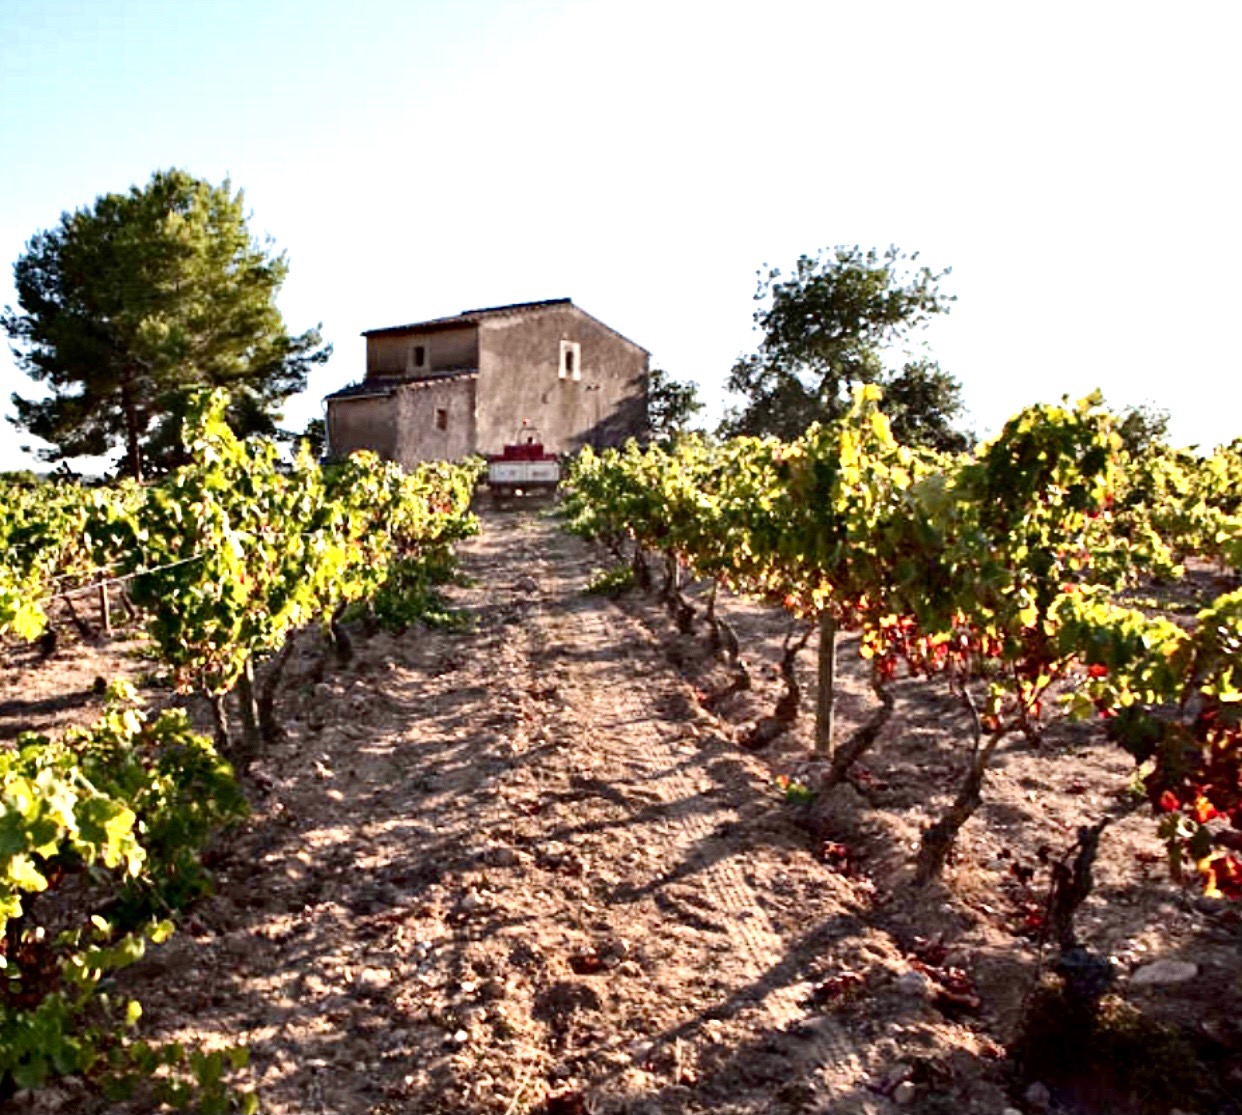 Deeply Rooted Farming Traditions Live on at Dasca Vives, a Biodynamic Winery in Catalonia Spain